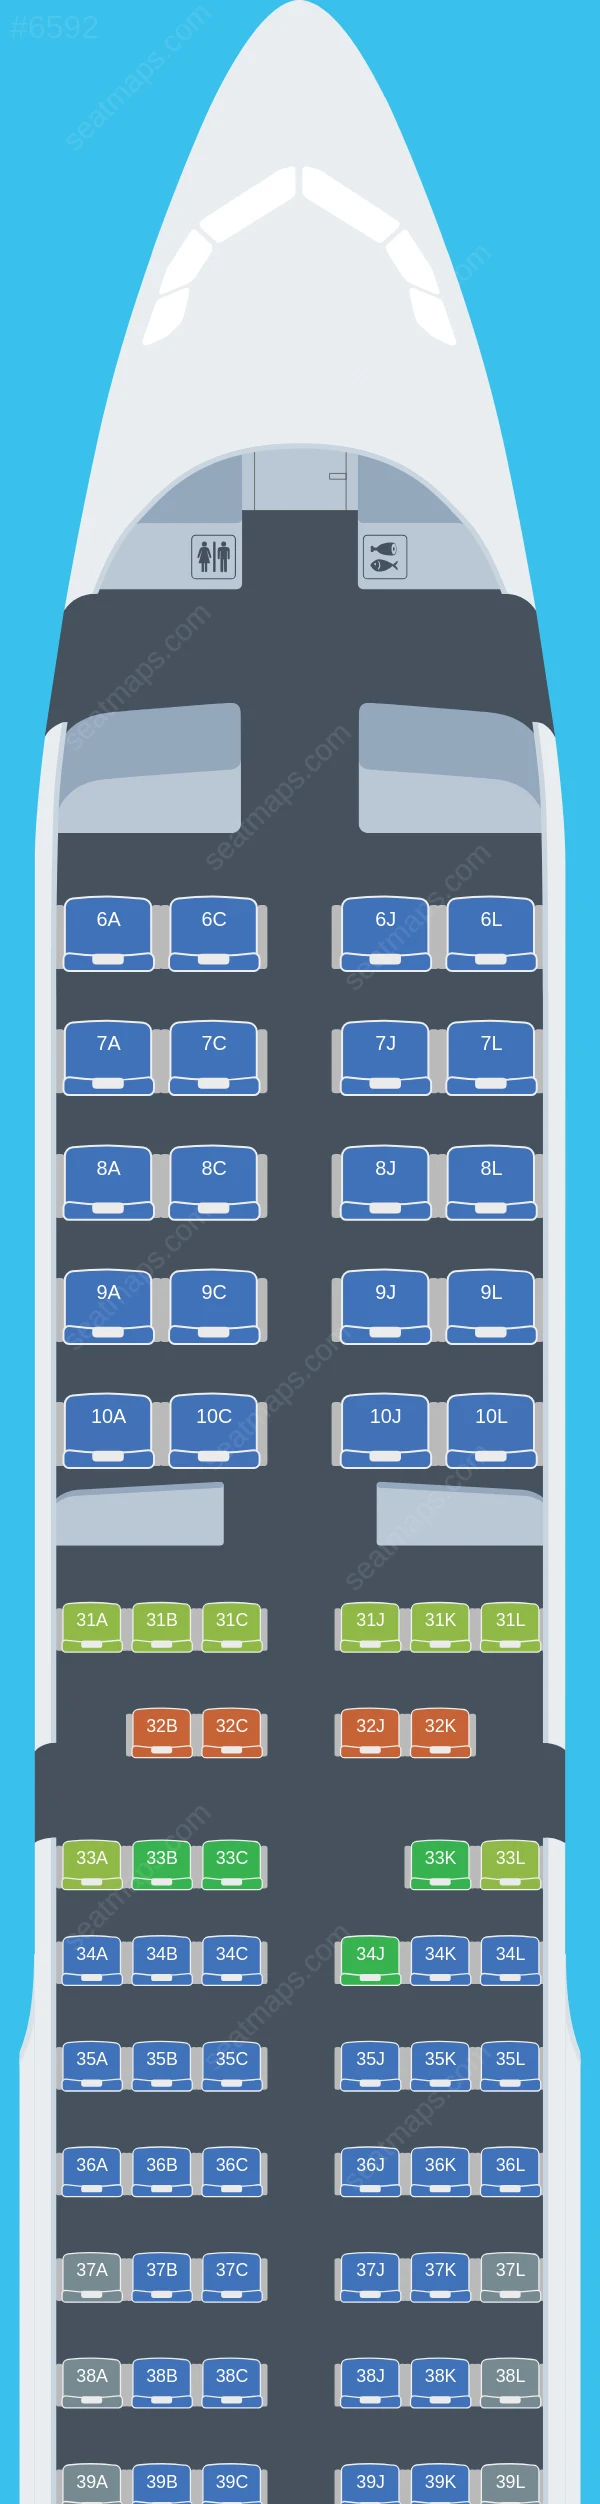 China Eastern Airbus A321-200 V.2 seatmap preview